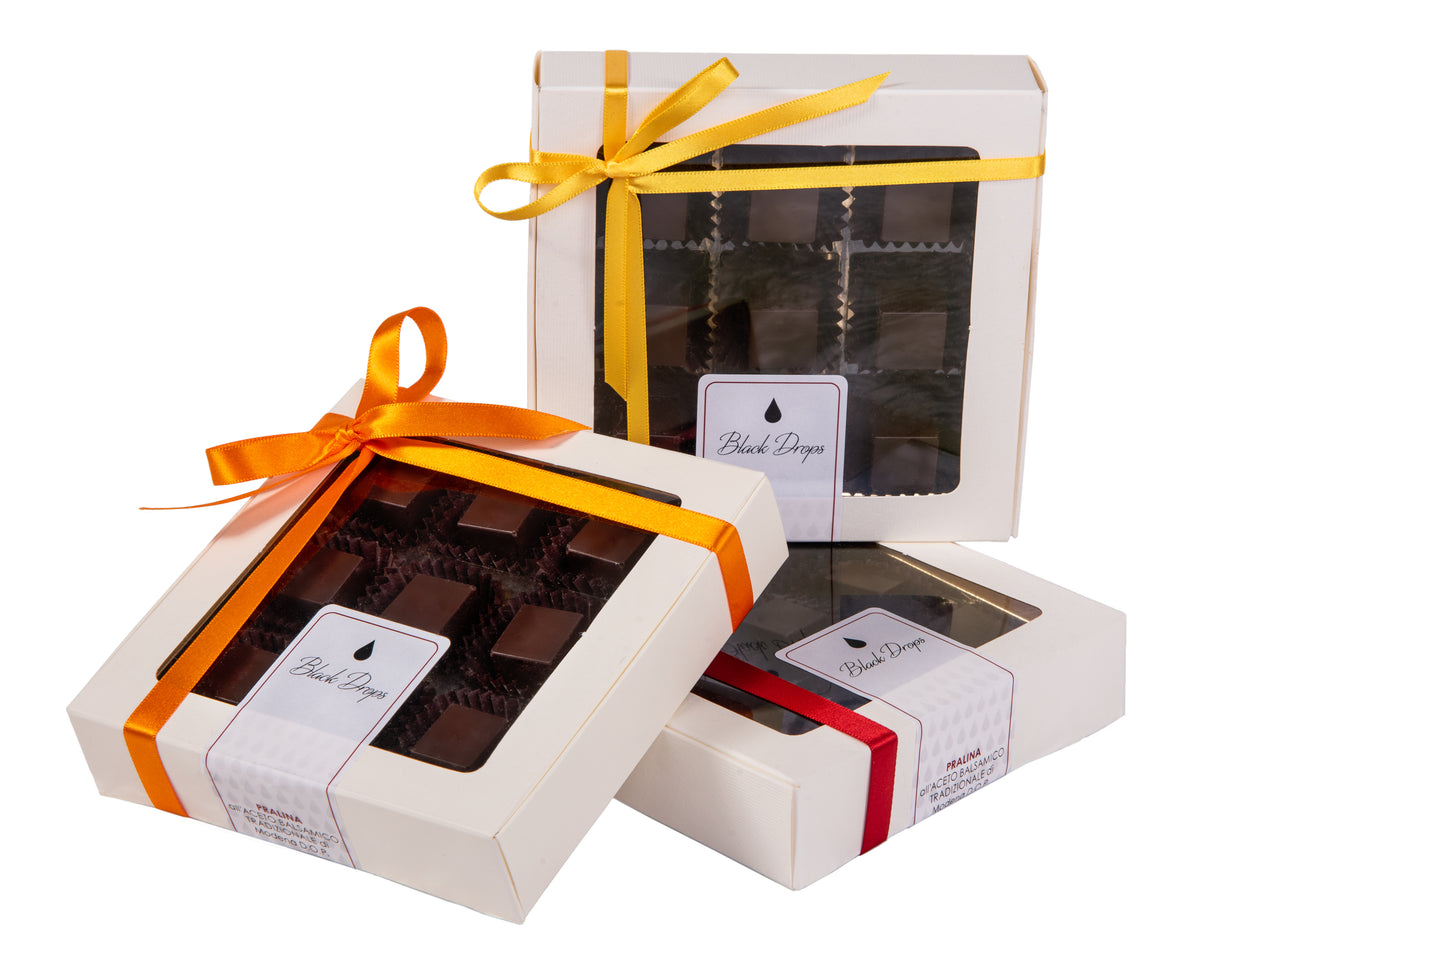 Chocolates with Traditional Balsamic Vinegar of Modena PDO aged 12 years